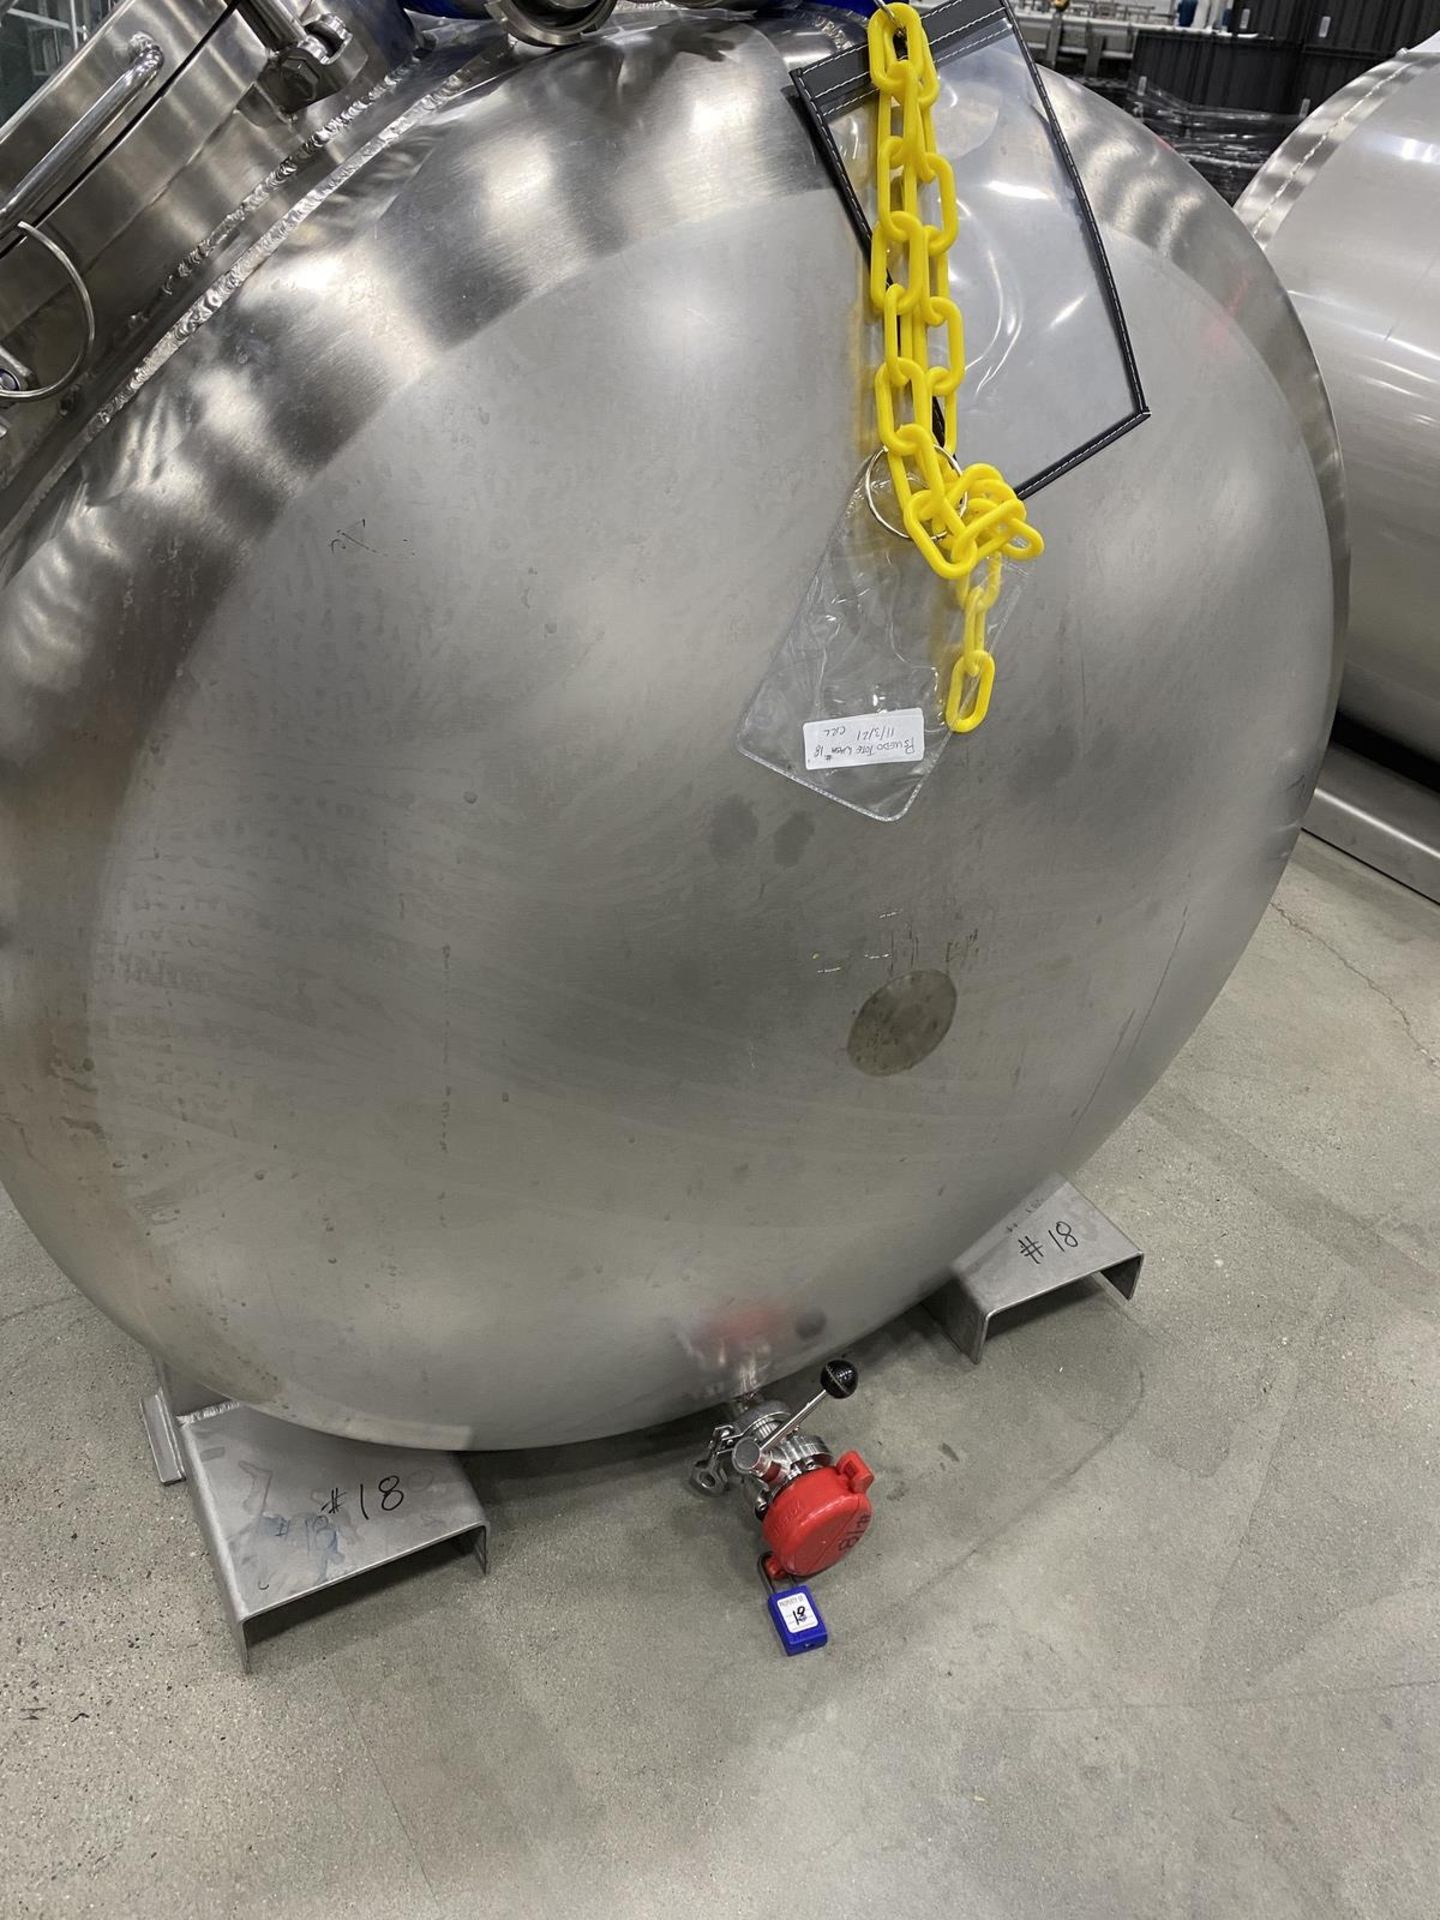 2019 A&B Process Systems 1,000 Liter Stainless Steel (316L) Skid Mounted Tank, 14. | Rig Fee: $200 - Image 3 of 3